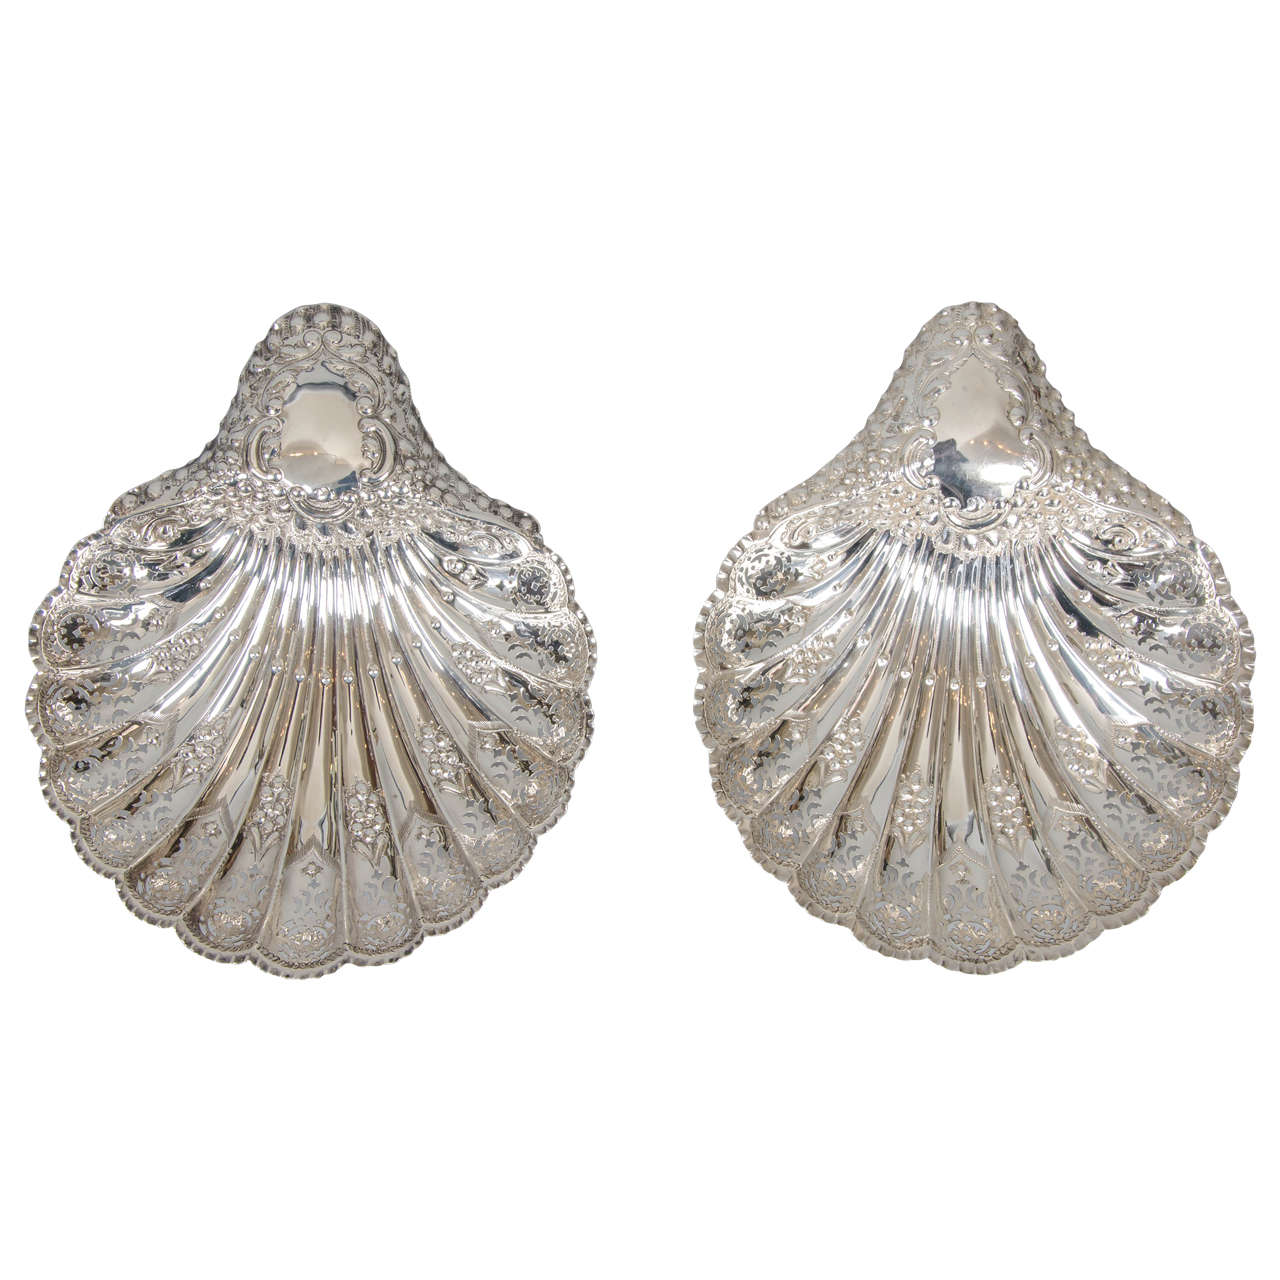 Pair of Silver Scalloped Shell Dishes For Sale